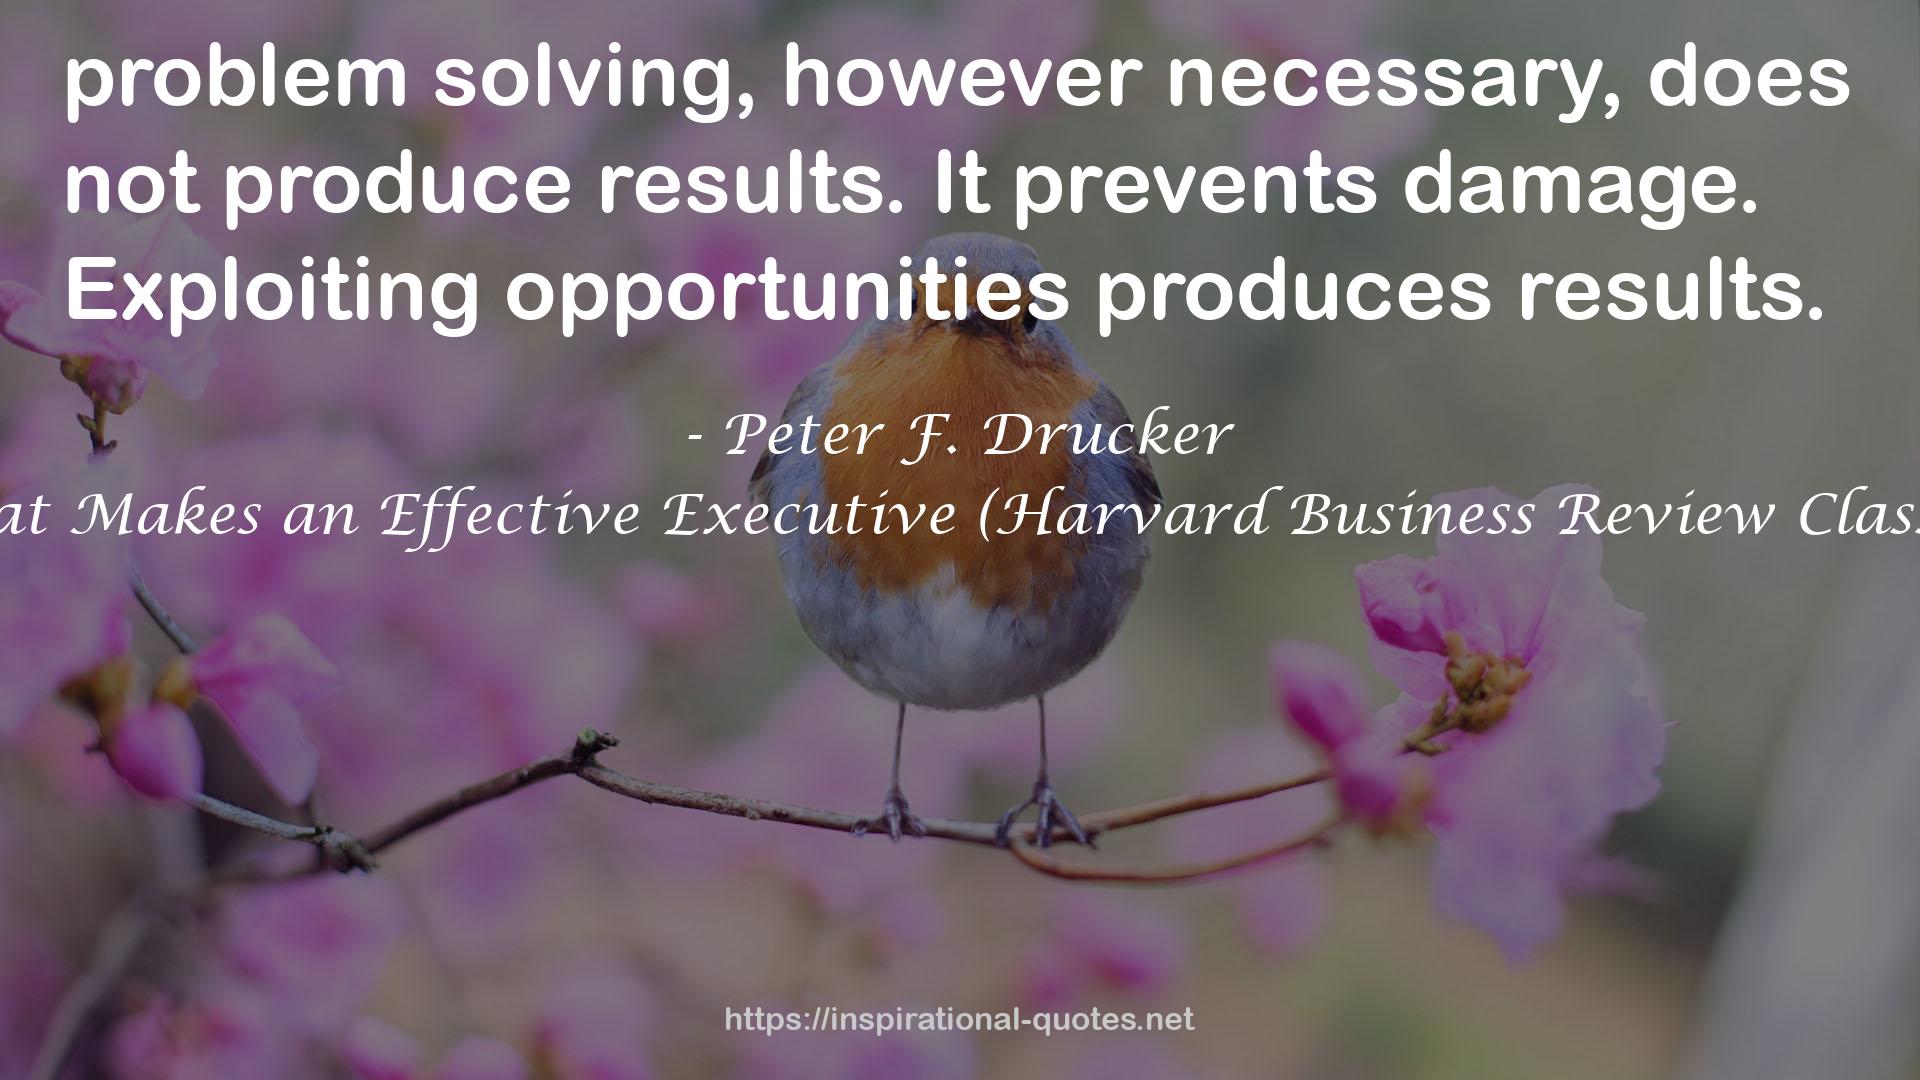 What Makes an Effective Executive (Harvard Business Review Classics) QUOTES